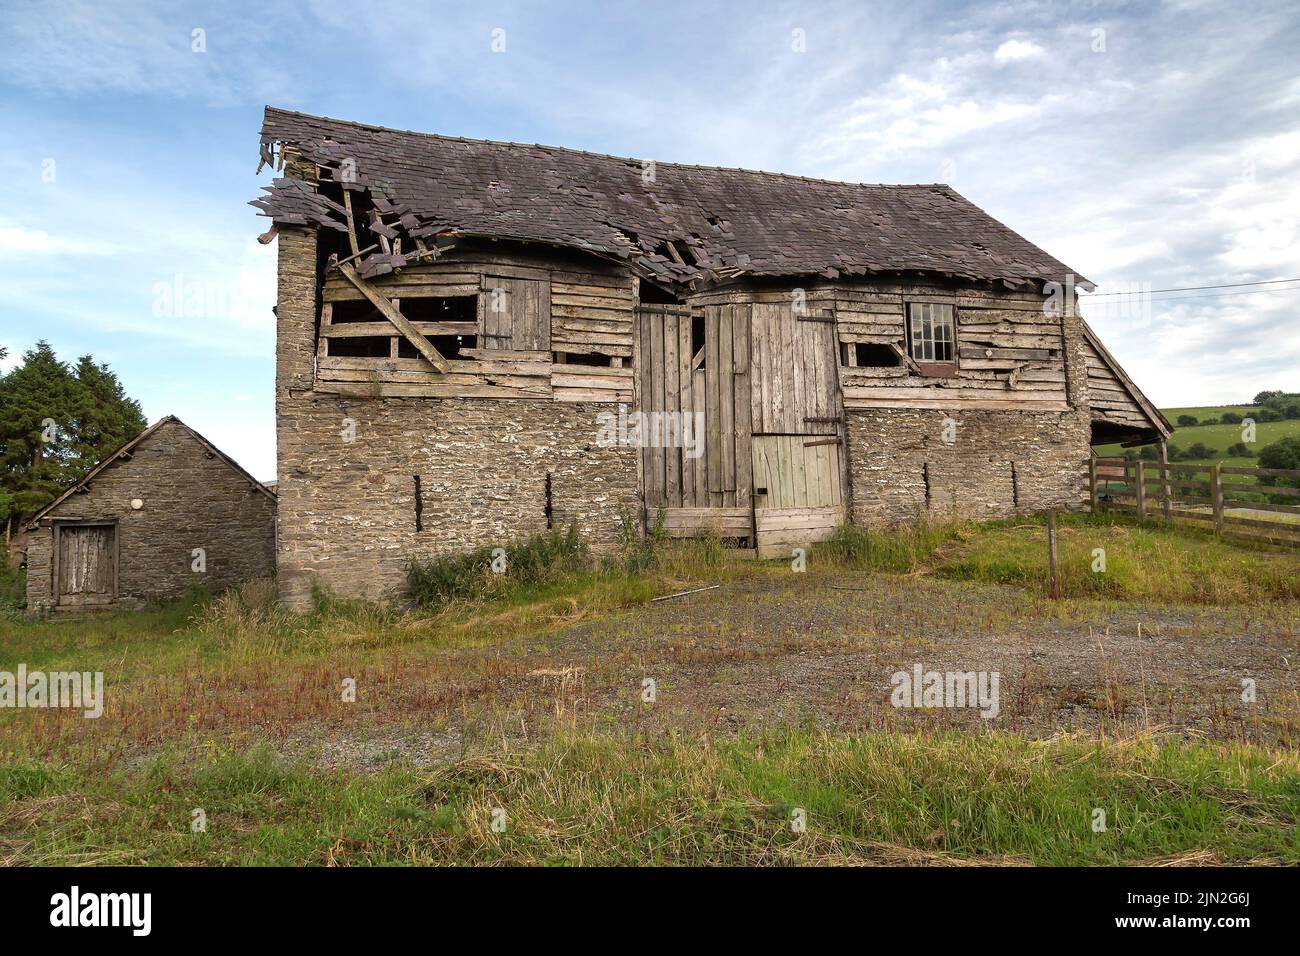 An old barn and outbuilding stand weathered and abandoned in a field. Stock Photo